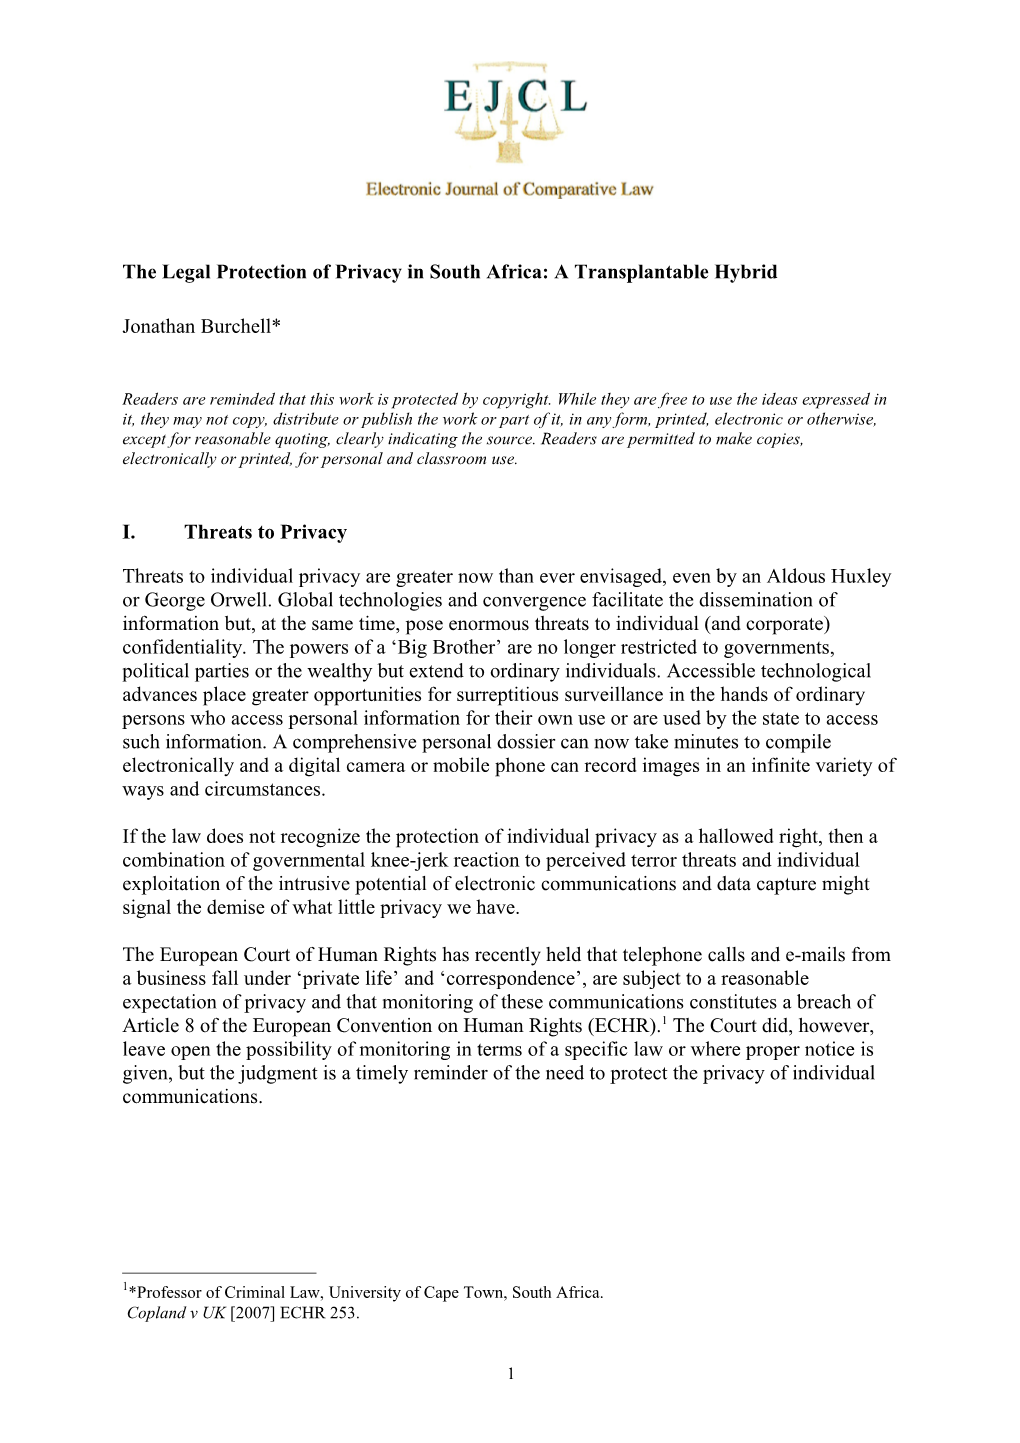 The Legal Protectionof Privacy in South Africa: Atransplantablehybrid